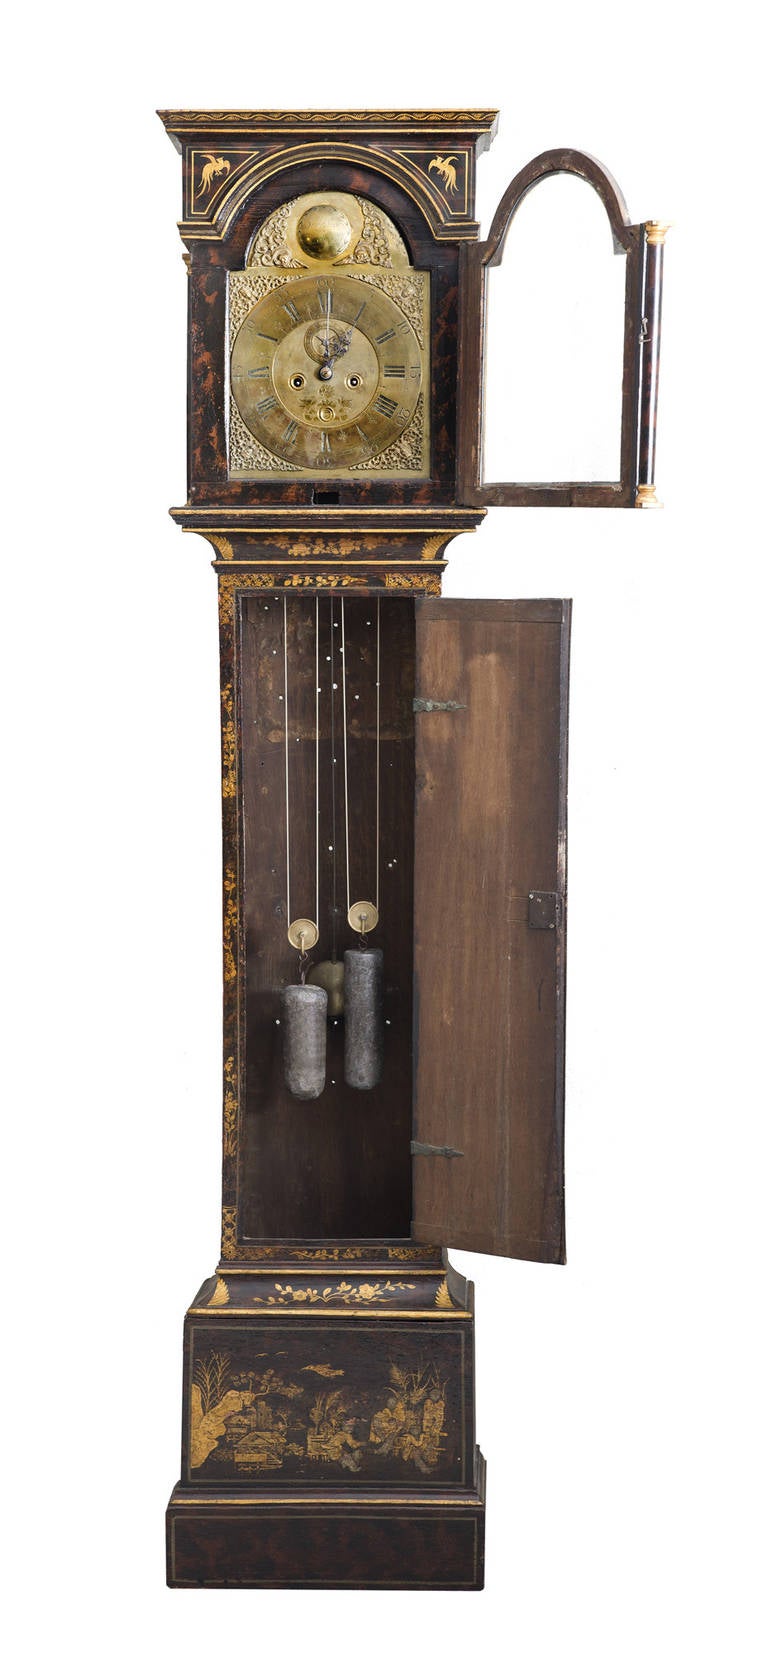 Very high quality Georgian Chinoiserie lacquered  tall case clock by Samuel Snow, London.  Eight-day movement, brass dial engraved with birds and a basket of fruit, minute dial and calendar.  Unusual faux tortoise shell decoration with gilding